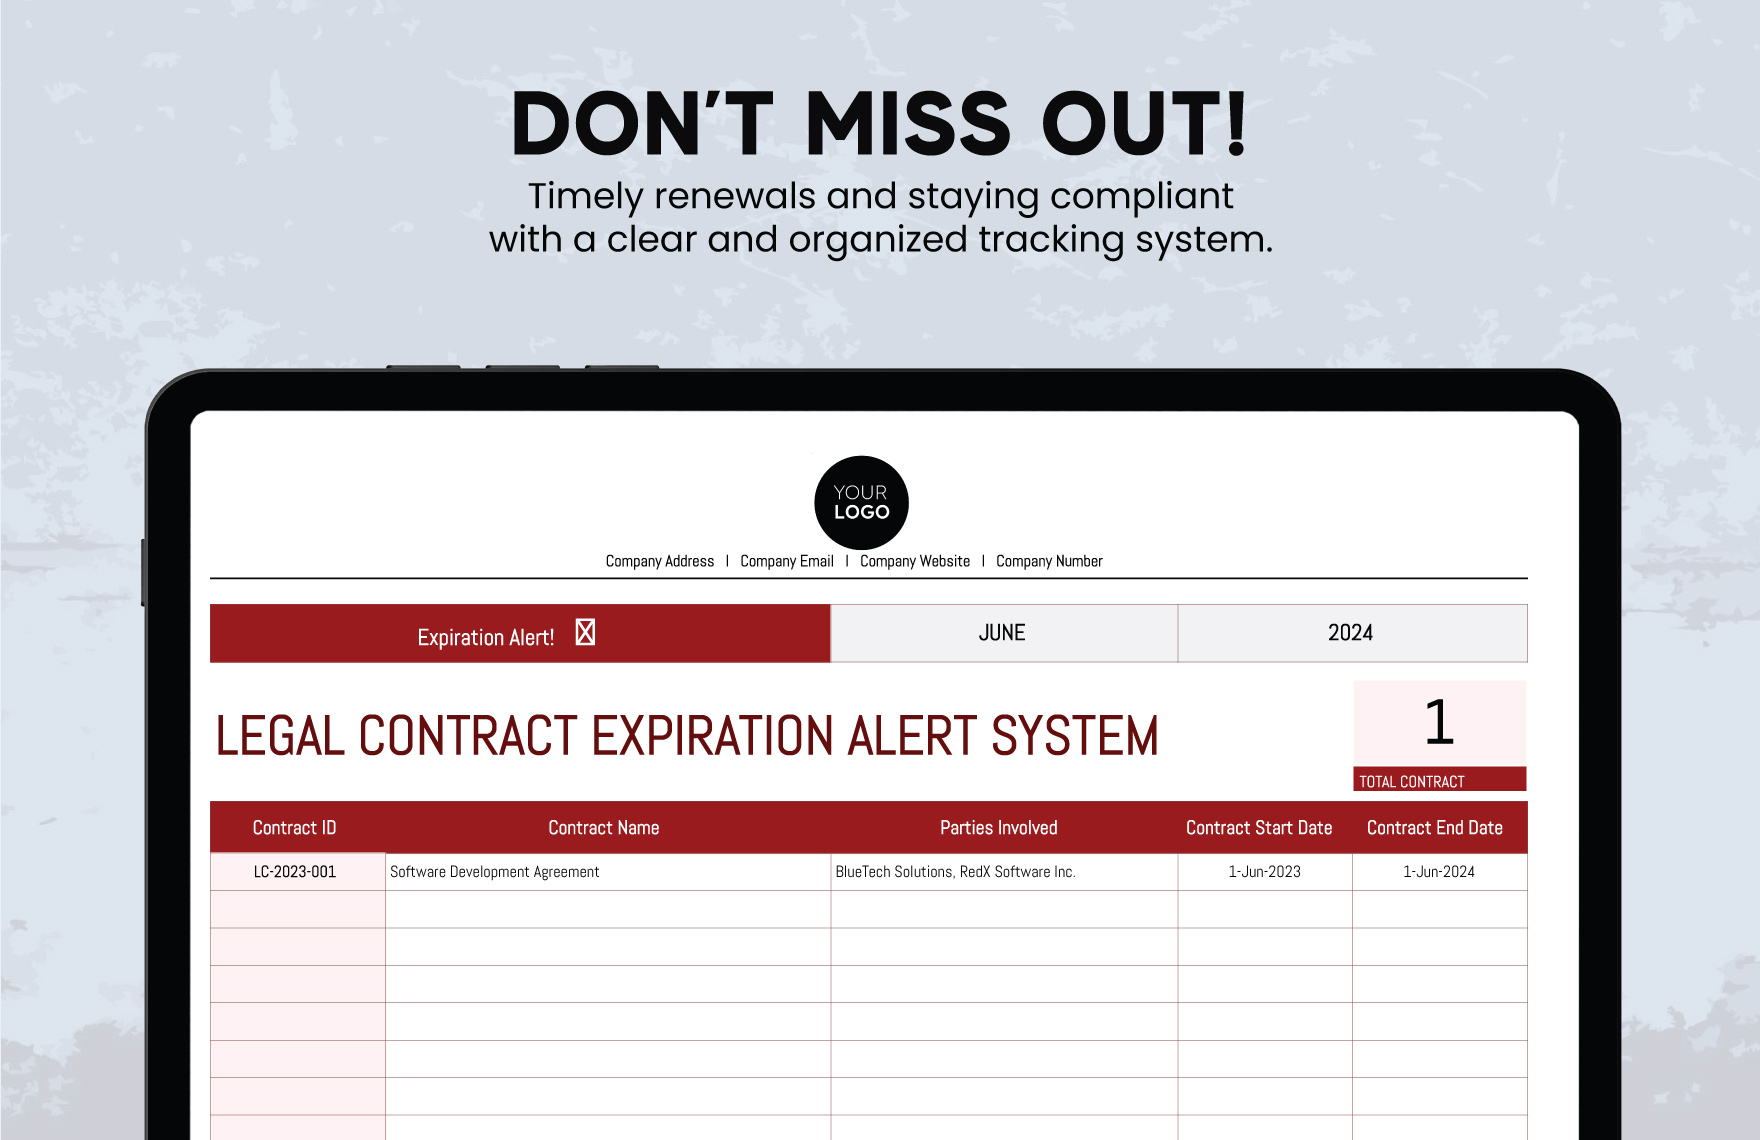 Legal Contract Expiration Alert System Template